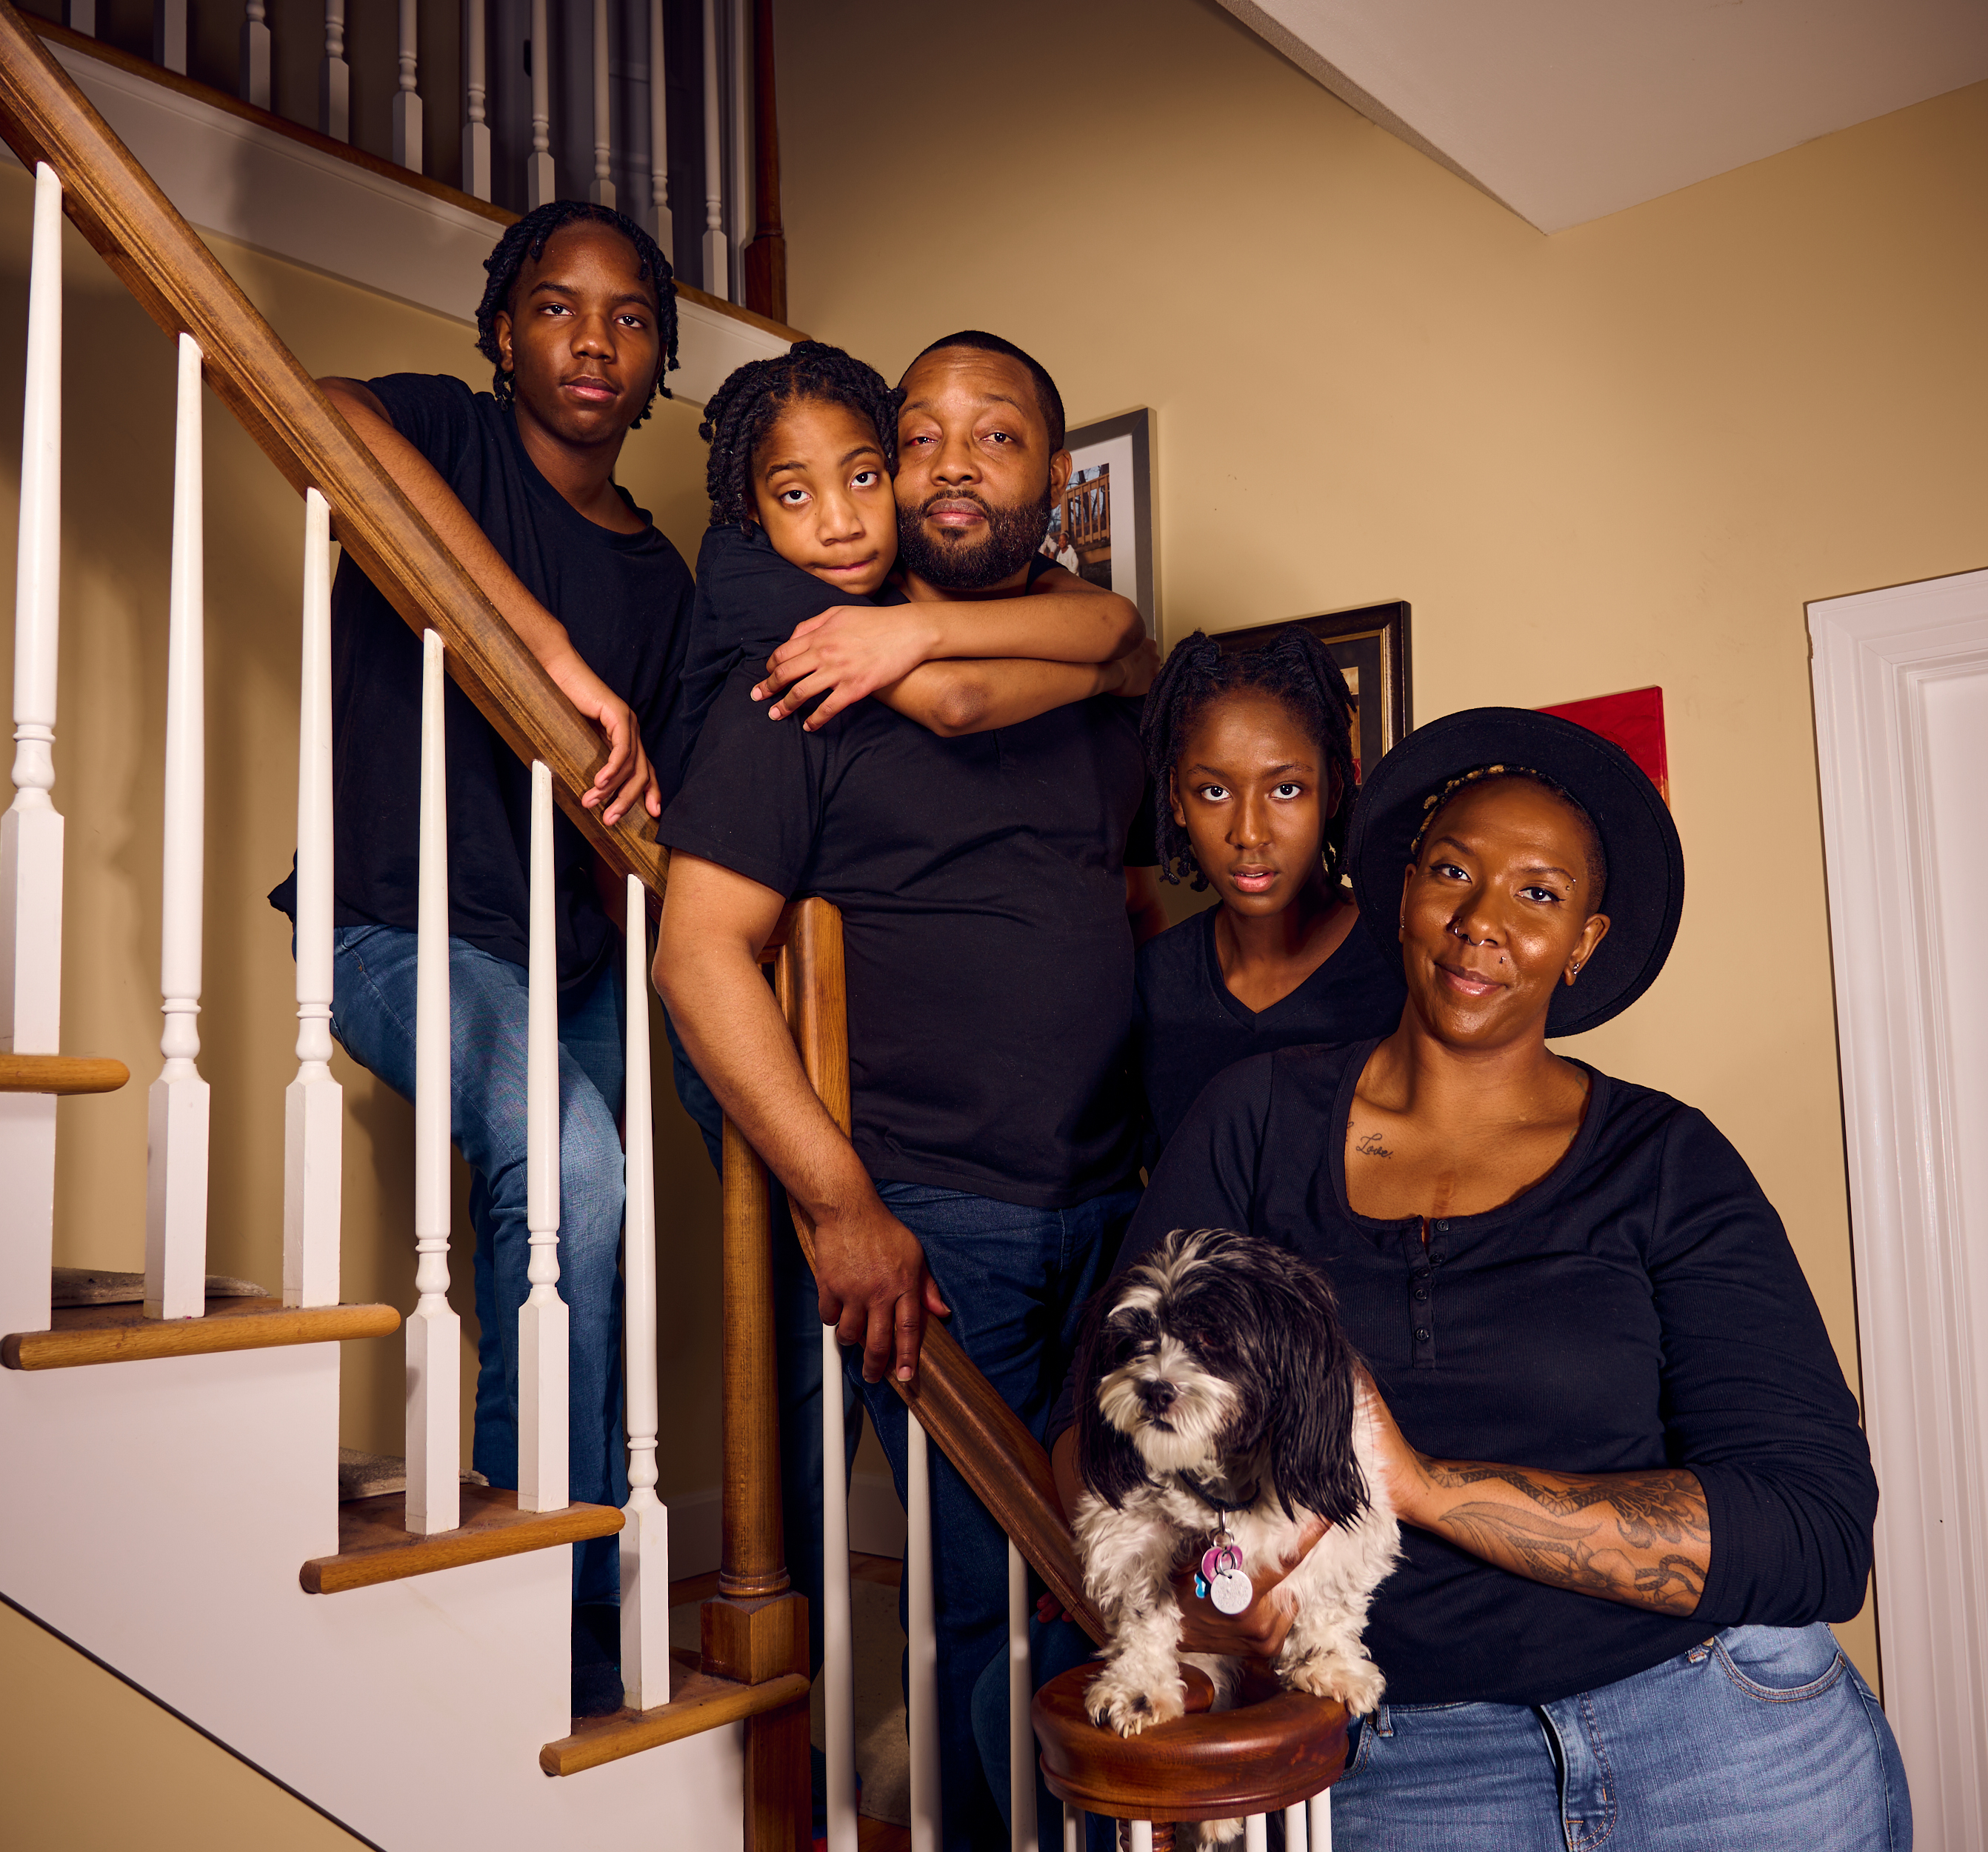 Family with two adults, three children, and a dog posing on staircase, looking at the camera, showing togetherness